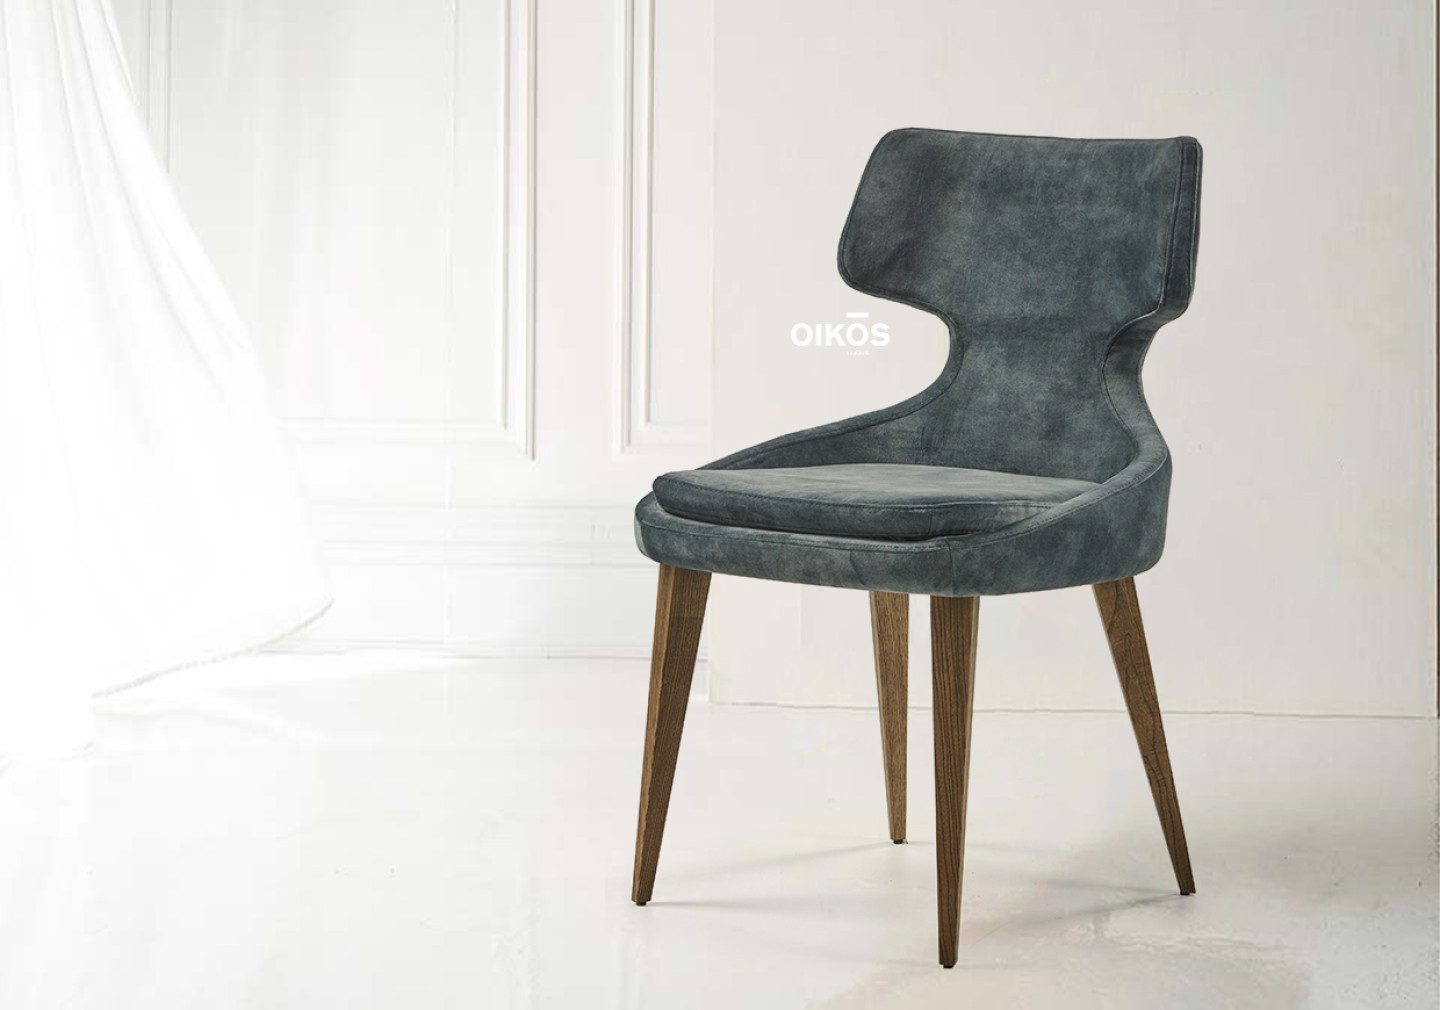 THE ARABELLA DINING CHAIR